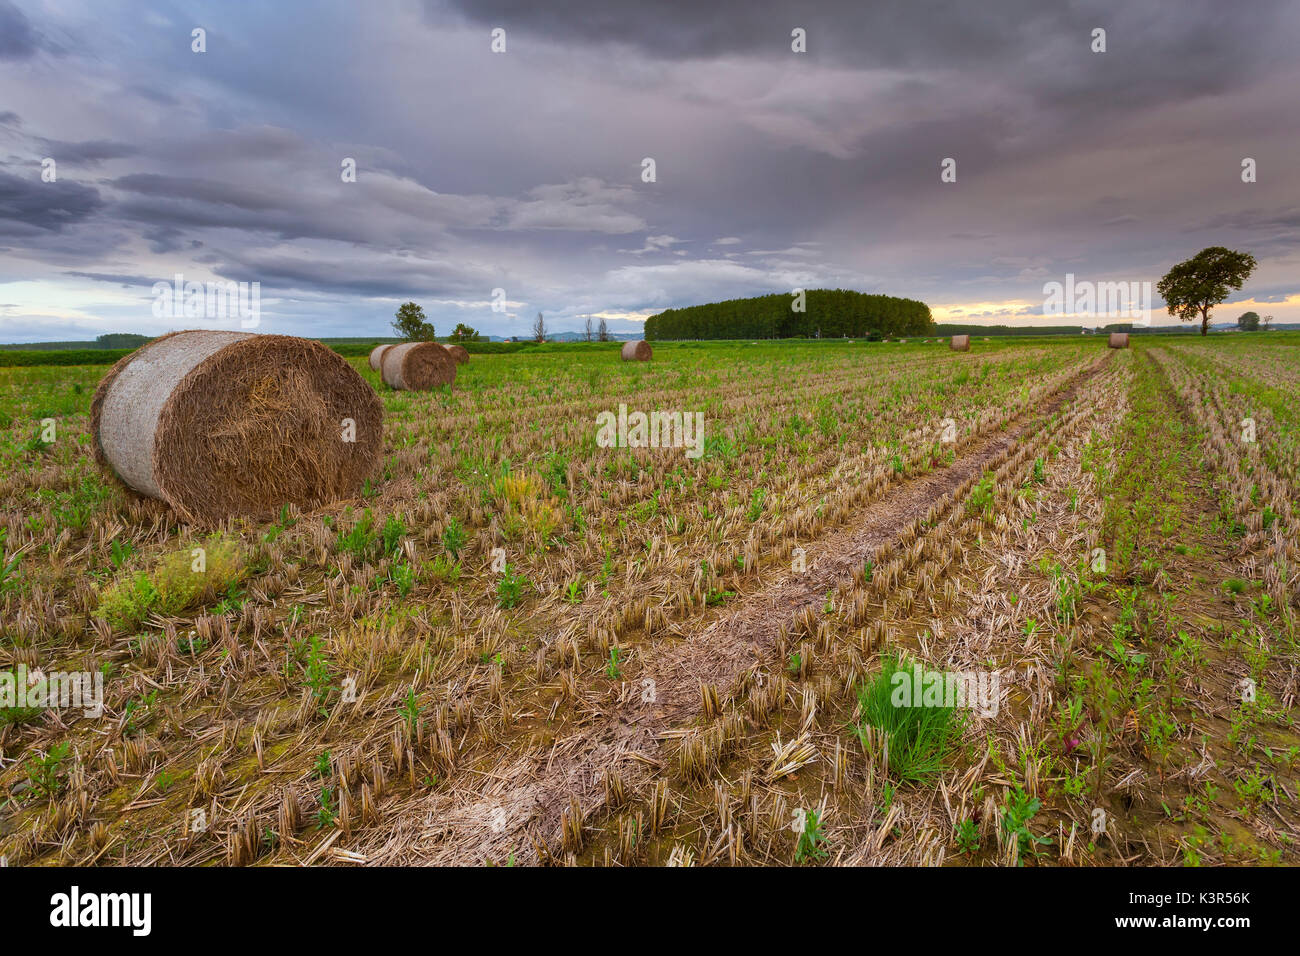 Lombardy, Italy. Wheat field after harvest, after a rainy day Stock Photo